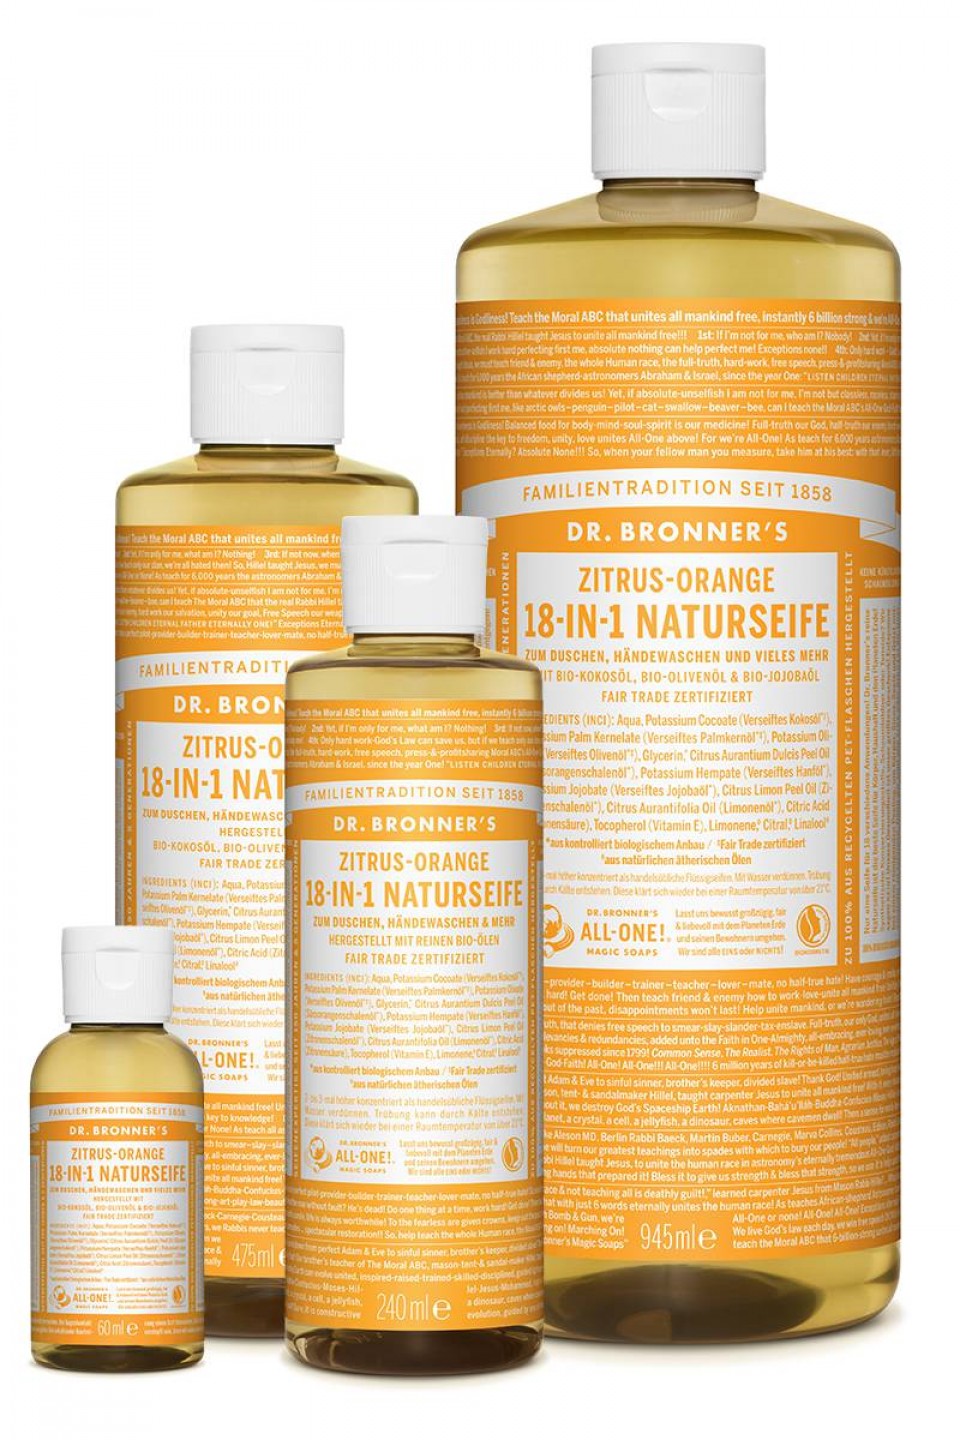 Dr. Bronner´s 18-IN-1 Naturseife